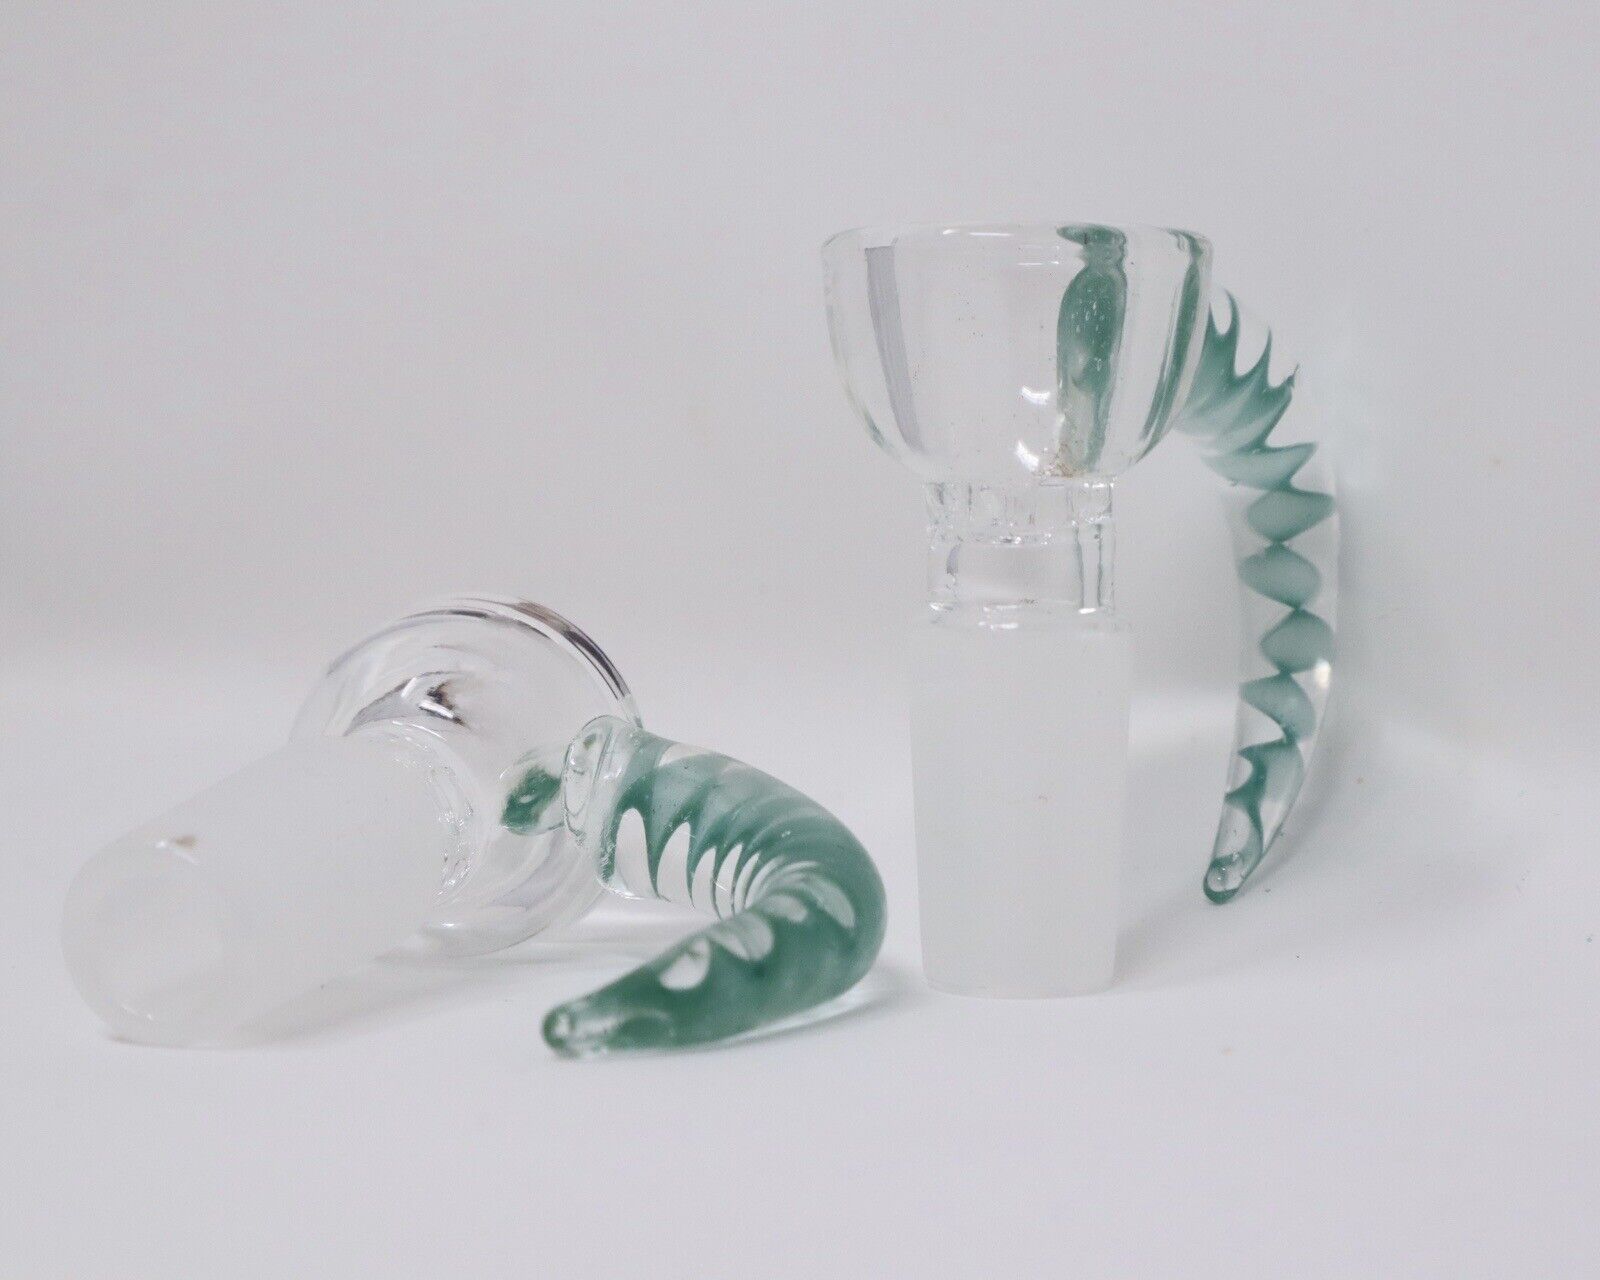 14mm Teal Colored Glass Honeycomb Horn Bowl Piece